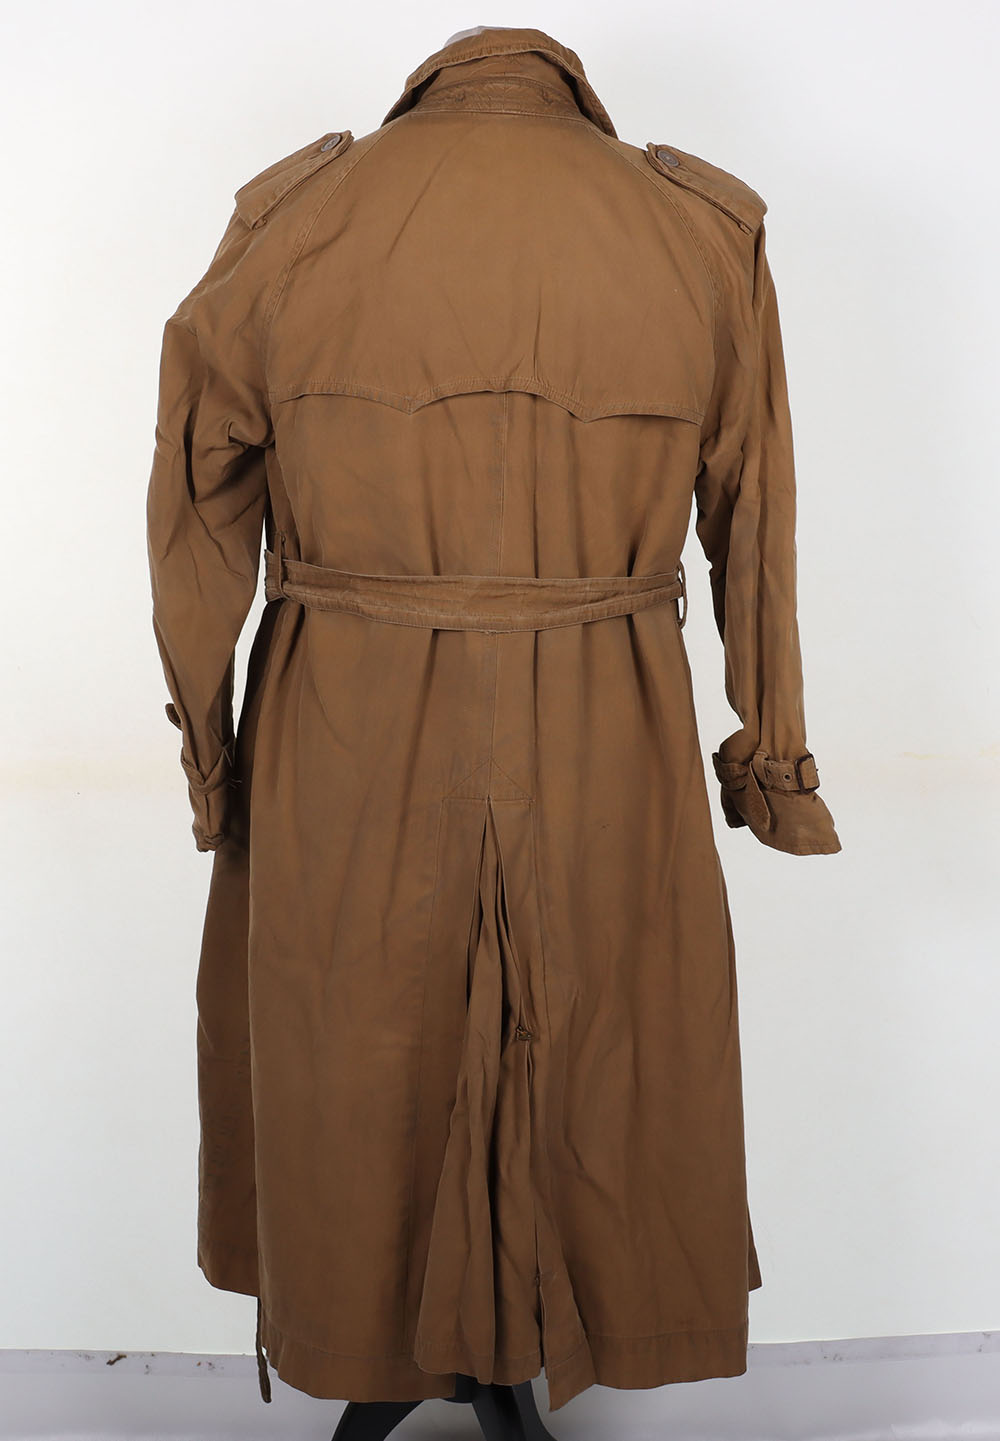 WW2 British Officers Trench Coat - Image 5 of 7